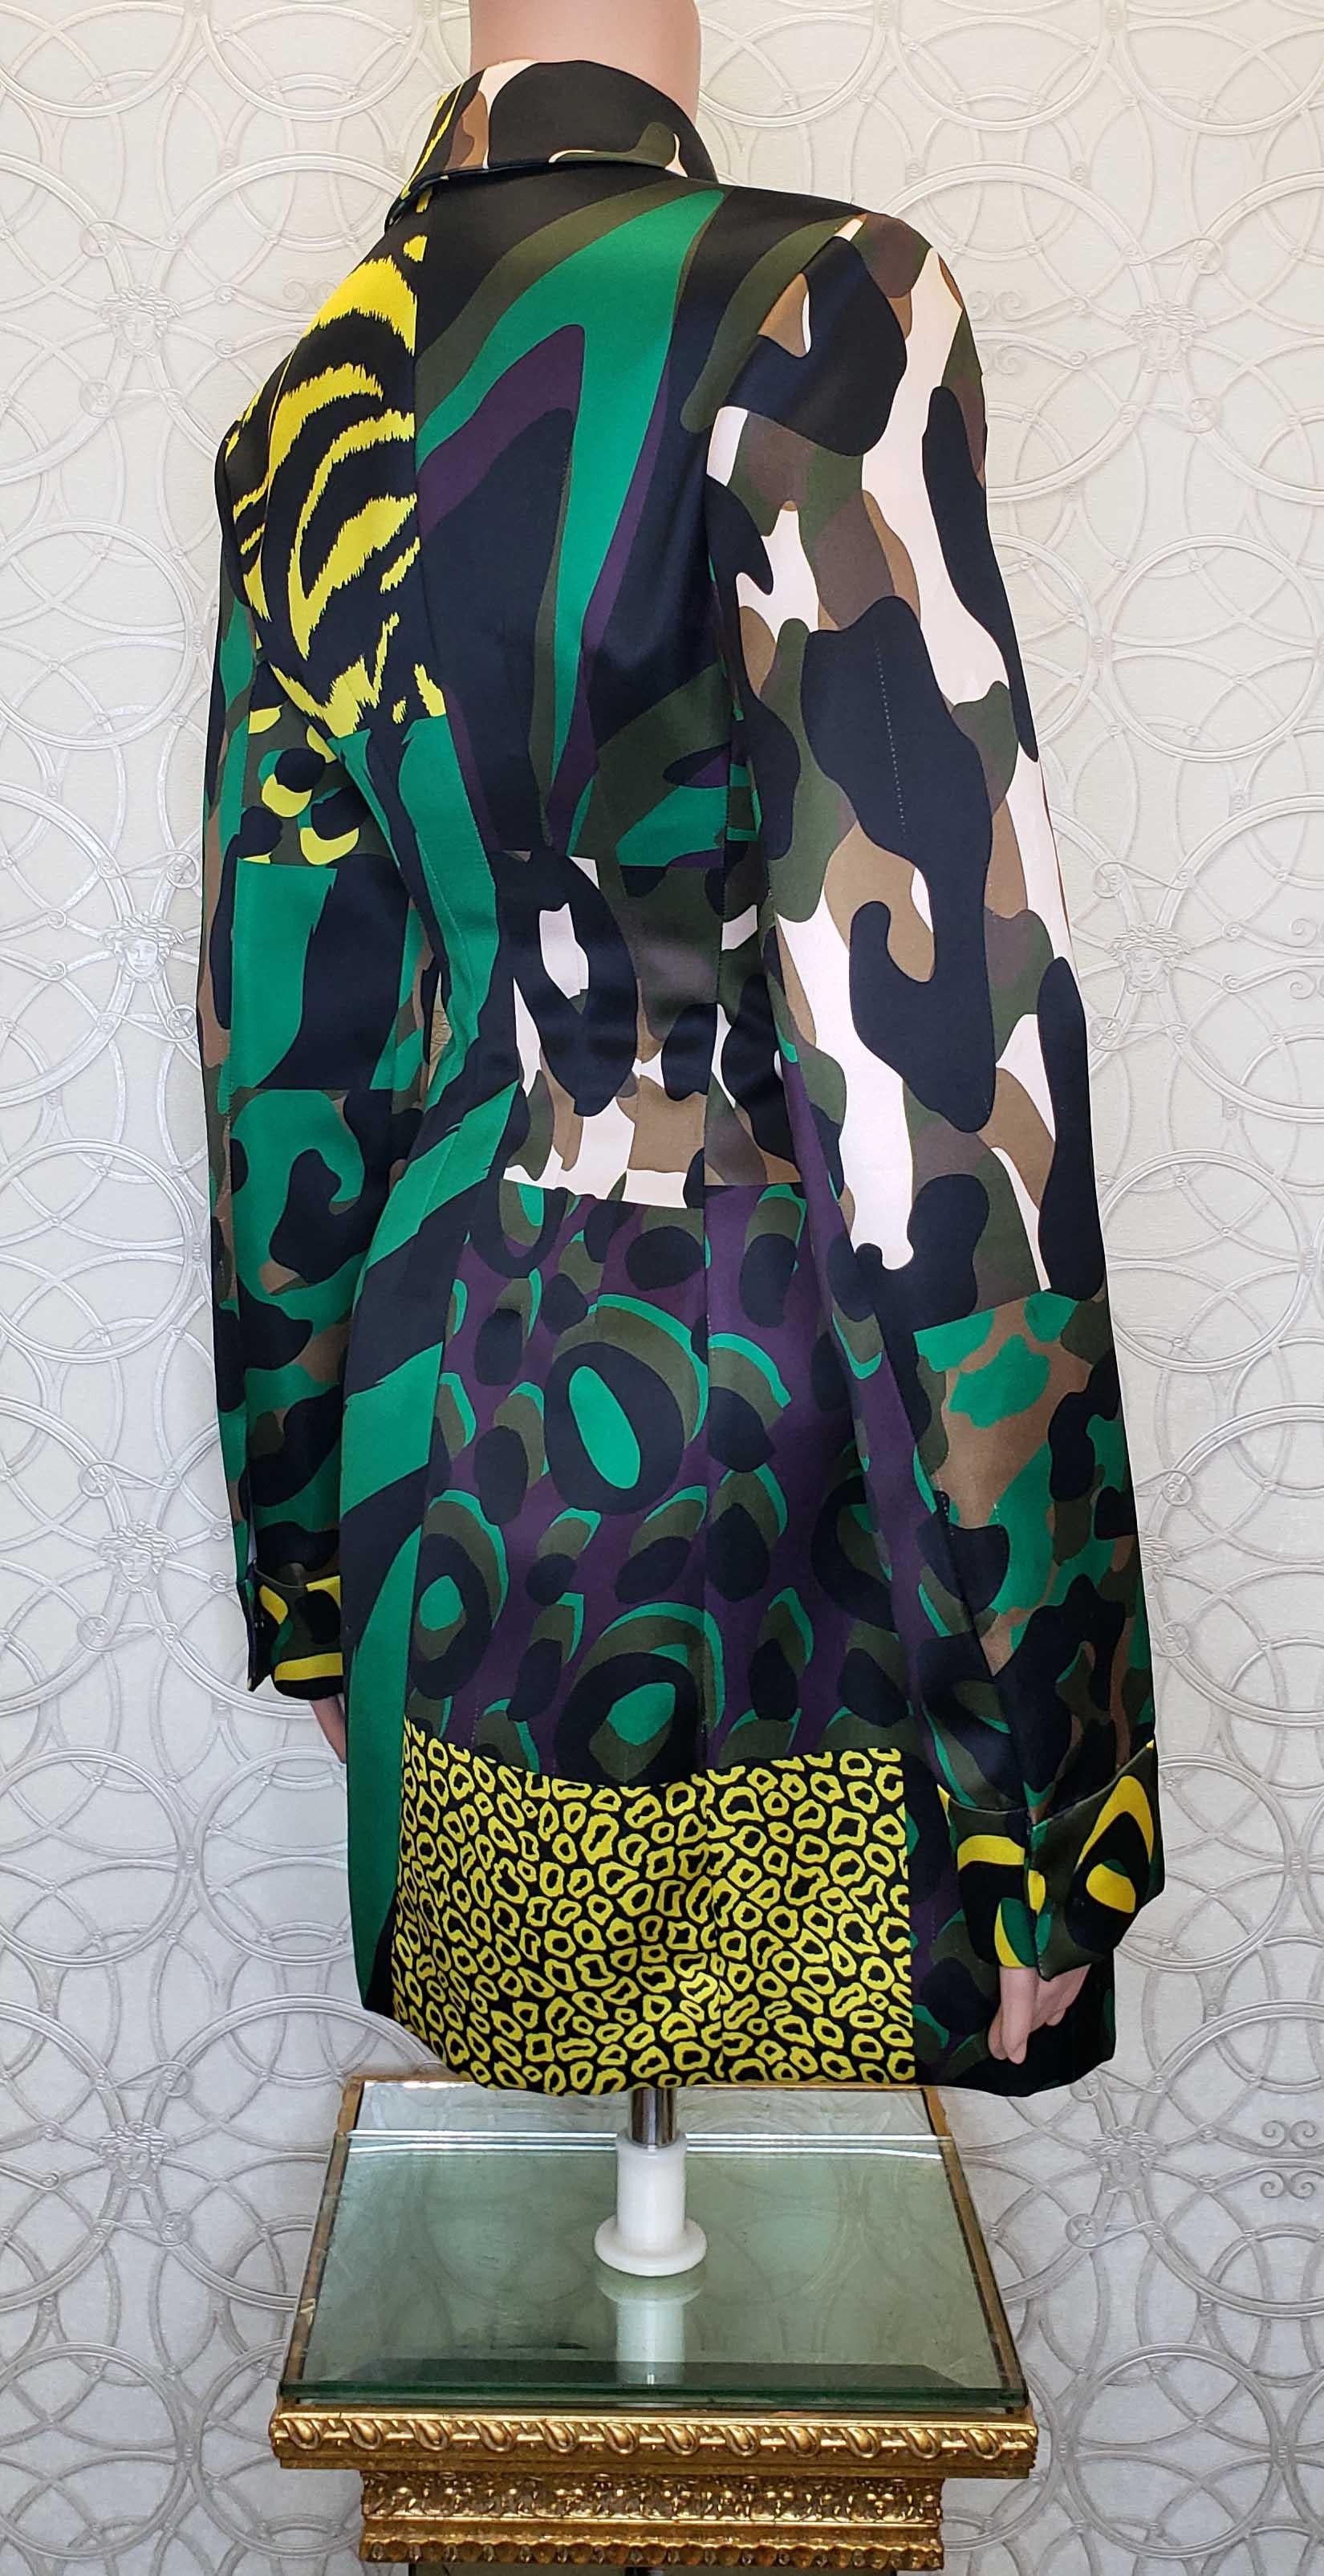 S/S 2016 L # 31 NEW VERSACE MULTI COLOR MILITARY Coat 38 - 2 For Sale 4